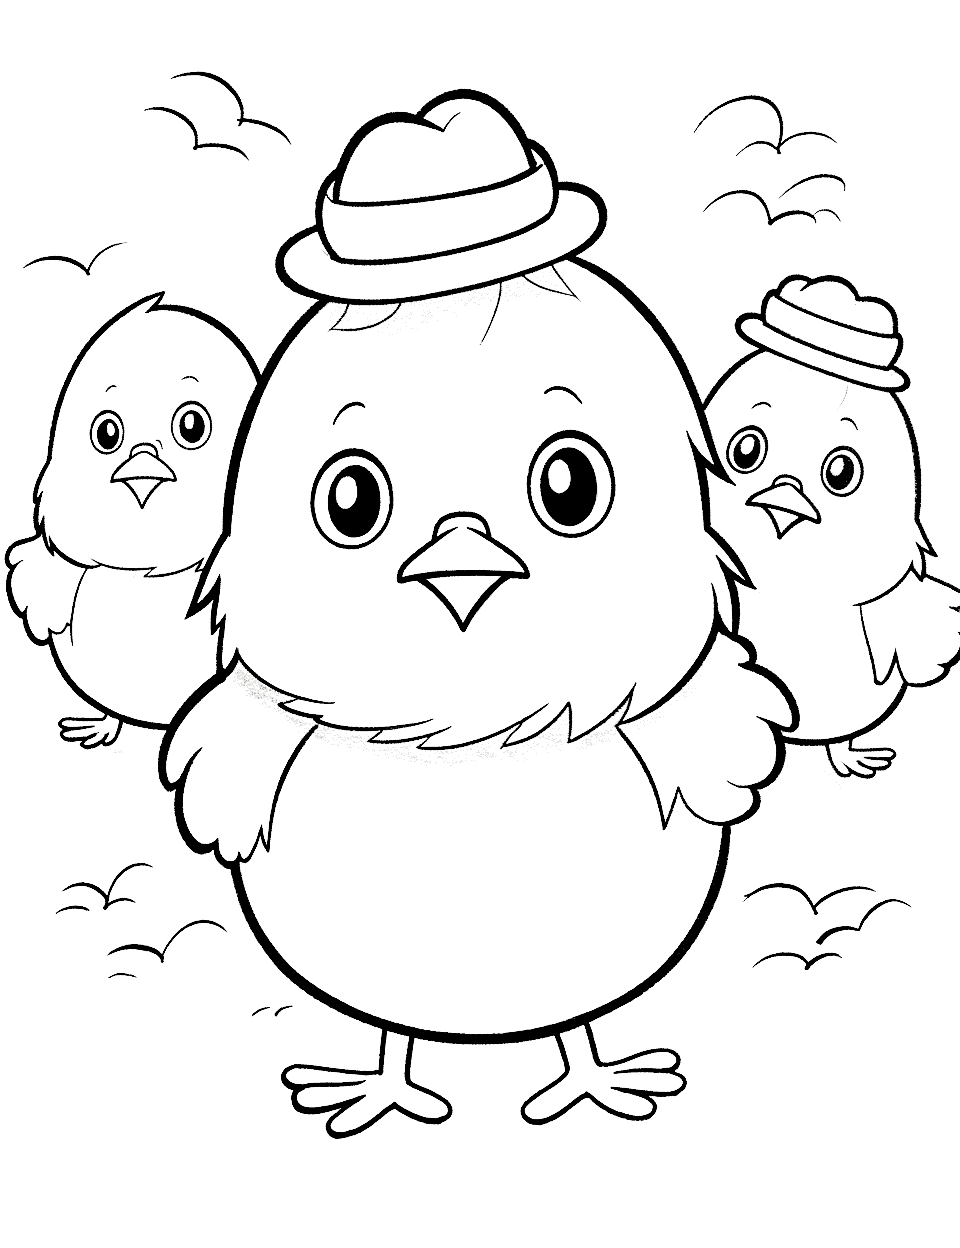 Joyful Chick Trio Easter Coloring Page - Three adorable chicks playing and dancing together, radiating happiness and adding a touch of cuteness to the Easter coloring page.